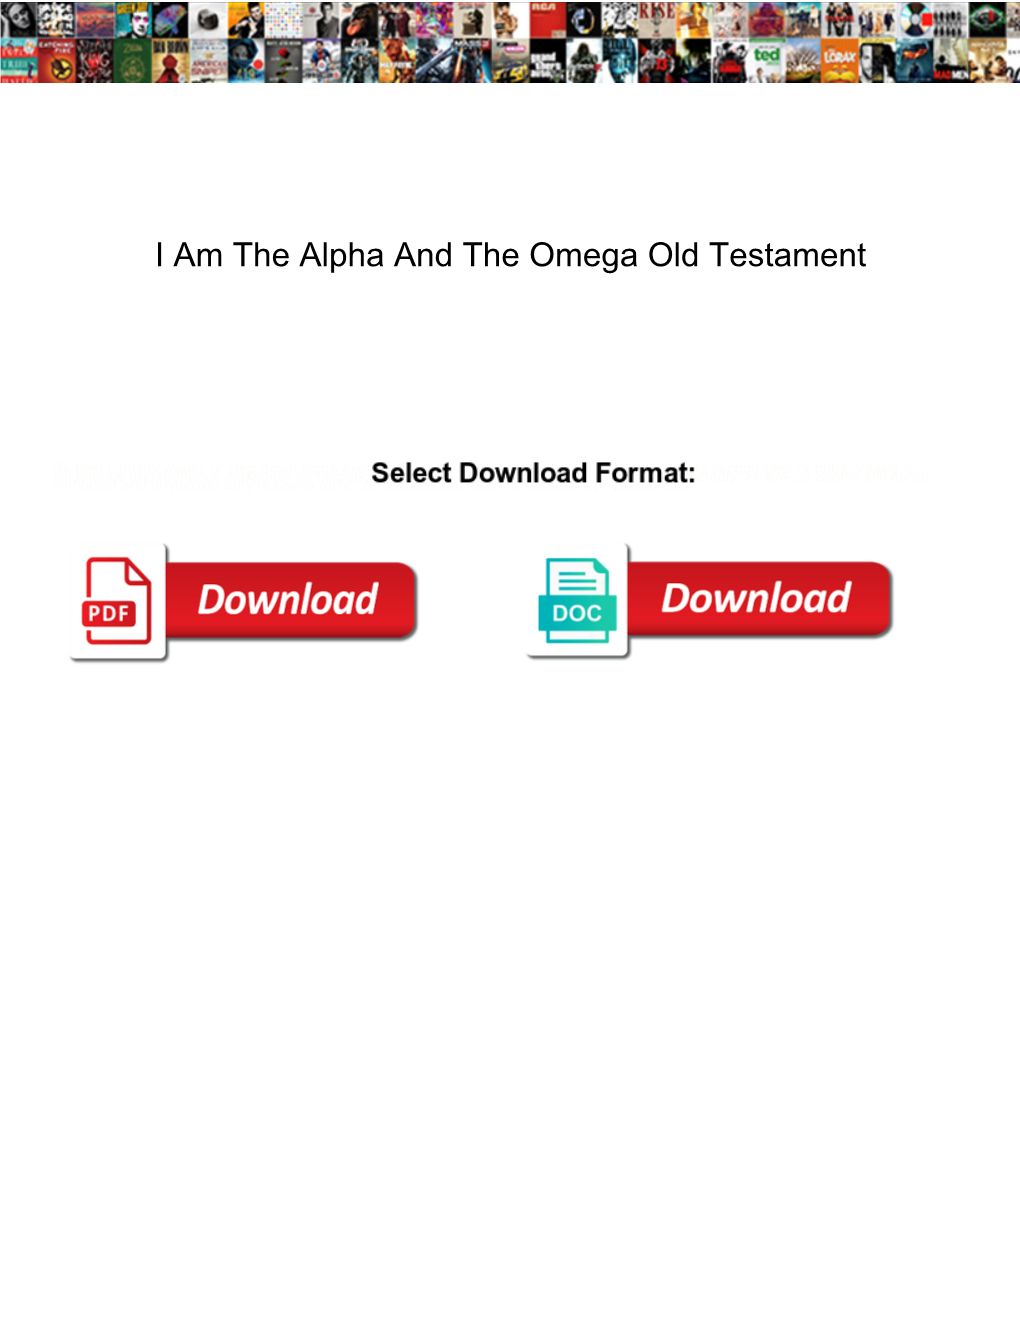 I Am the Alpha and the Omega Old Testament